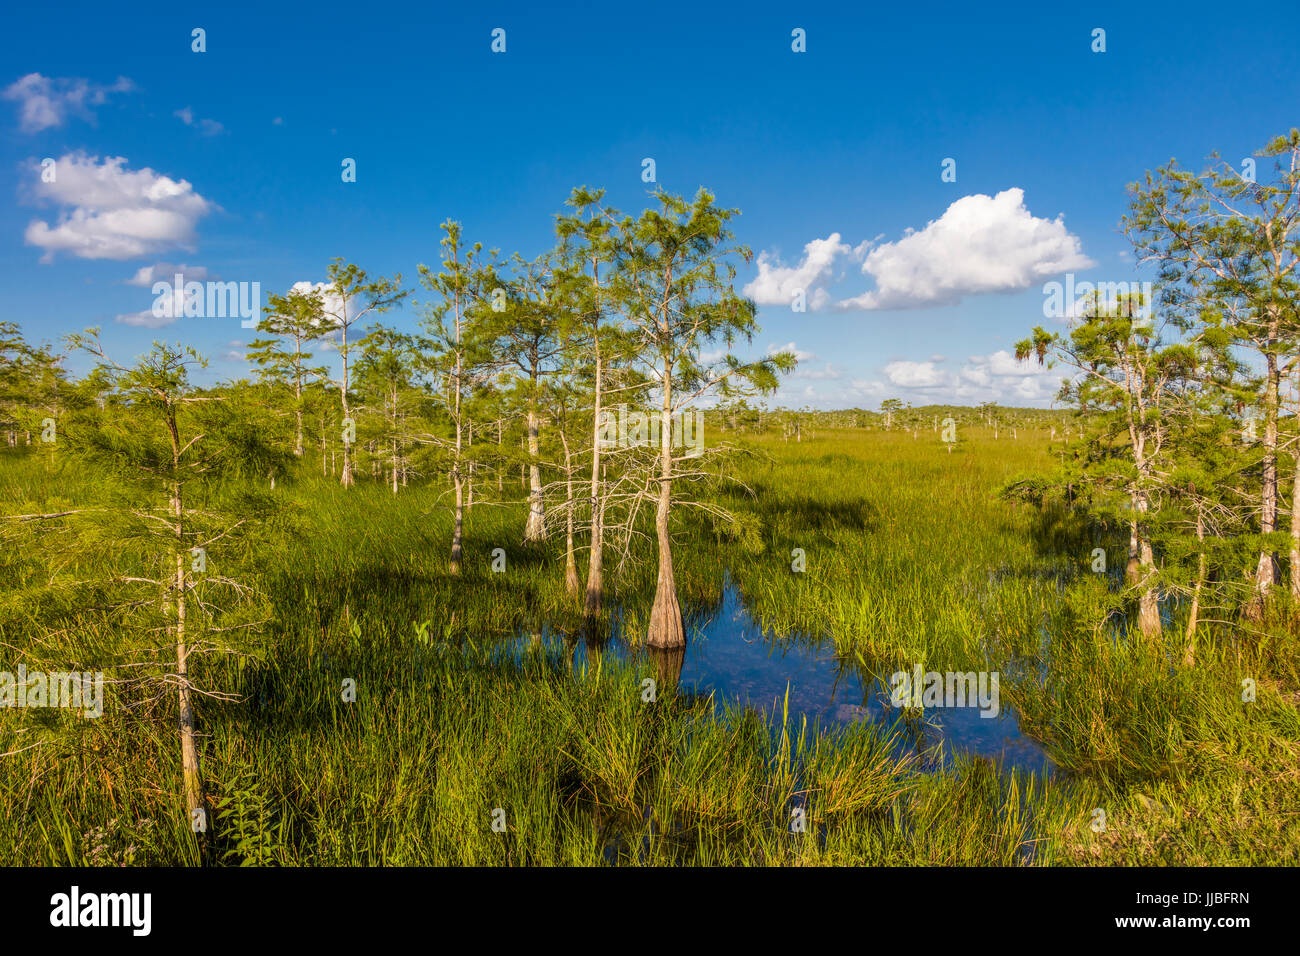 Dwarf Cypress trees in wet grasslands of Everglades National Park in South Florida Stock Photo